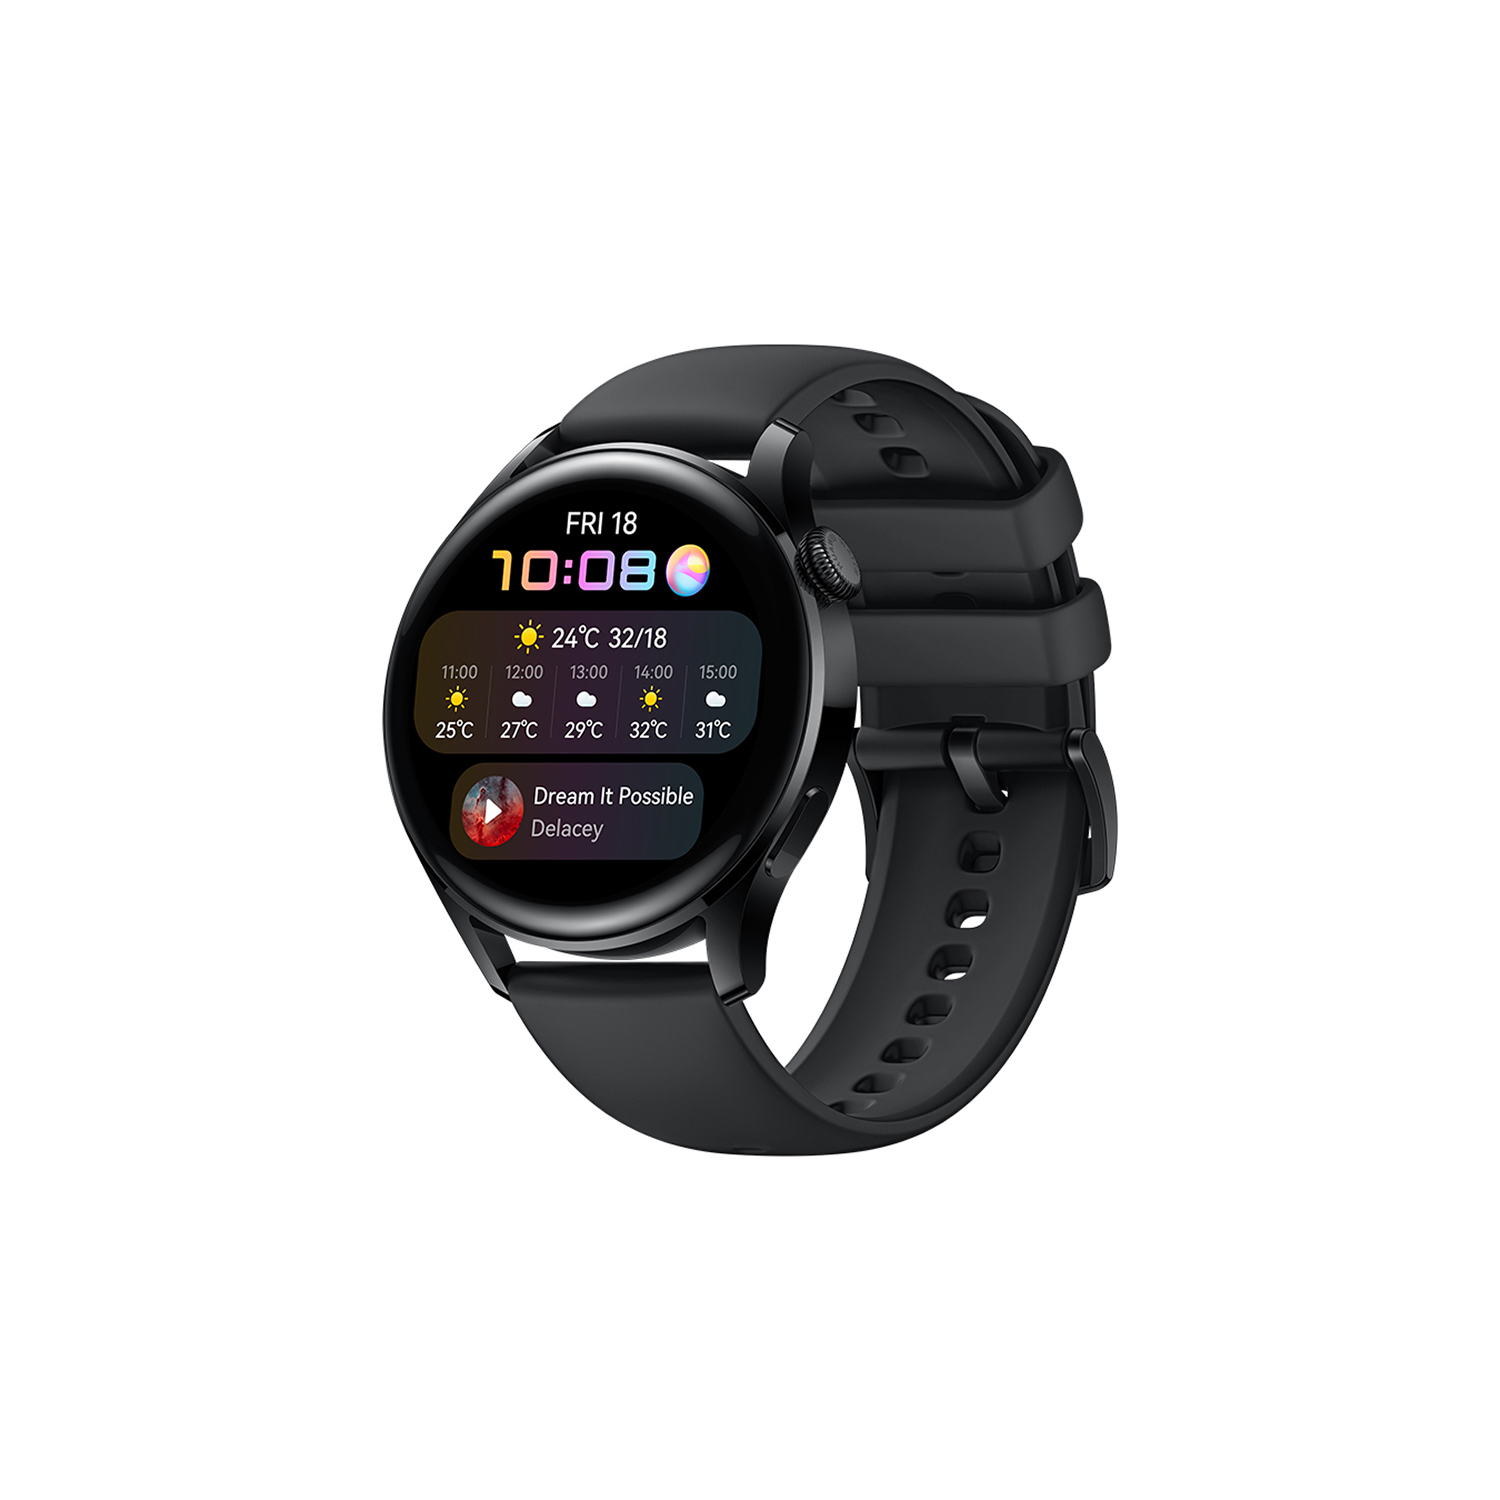 Huawei Watch 3, Watch 3 Pro specifications and renders leaked hours before  the launch - Gizmochina